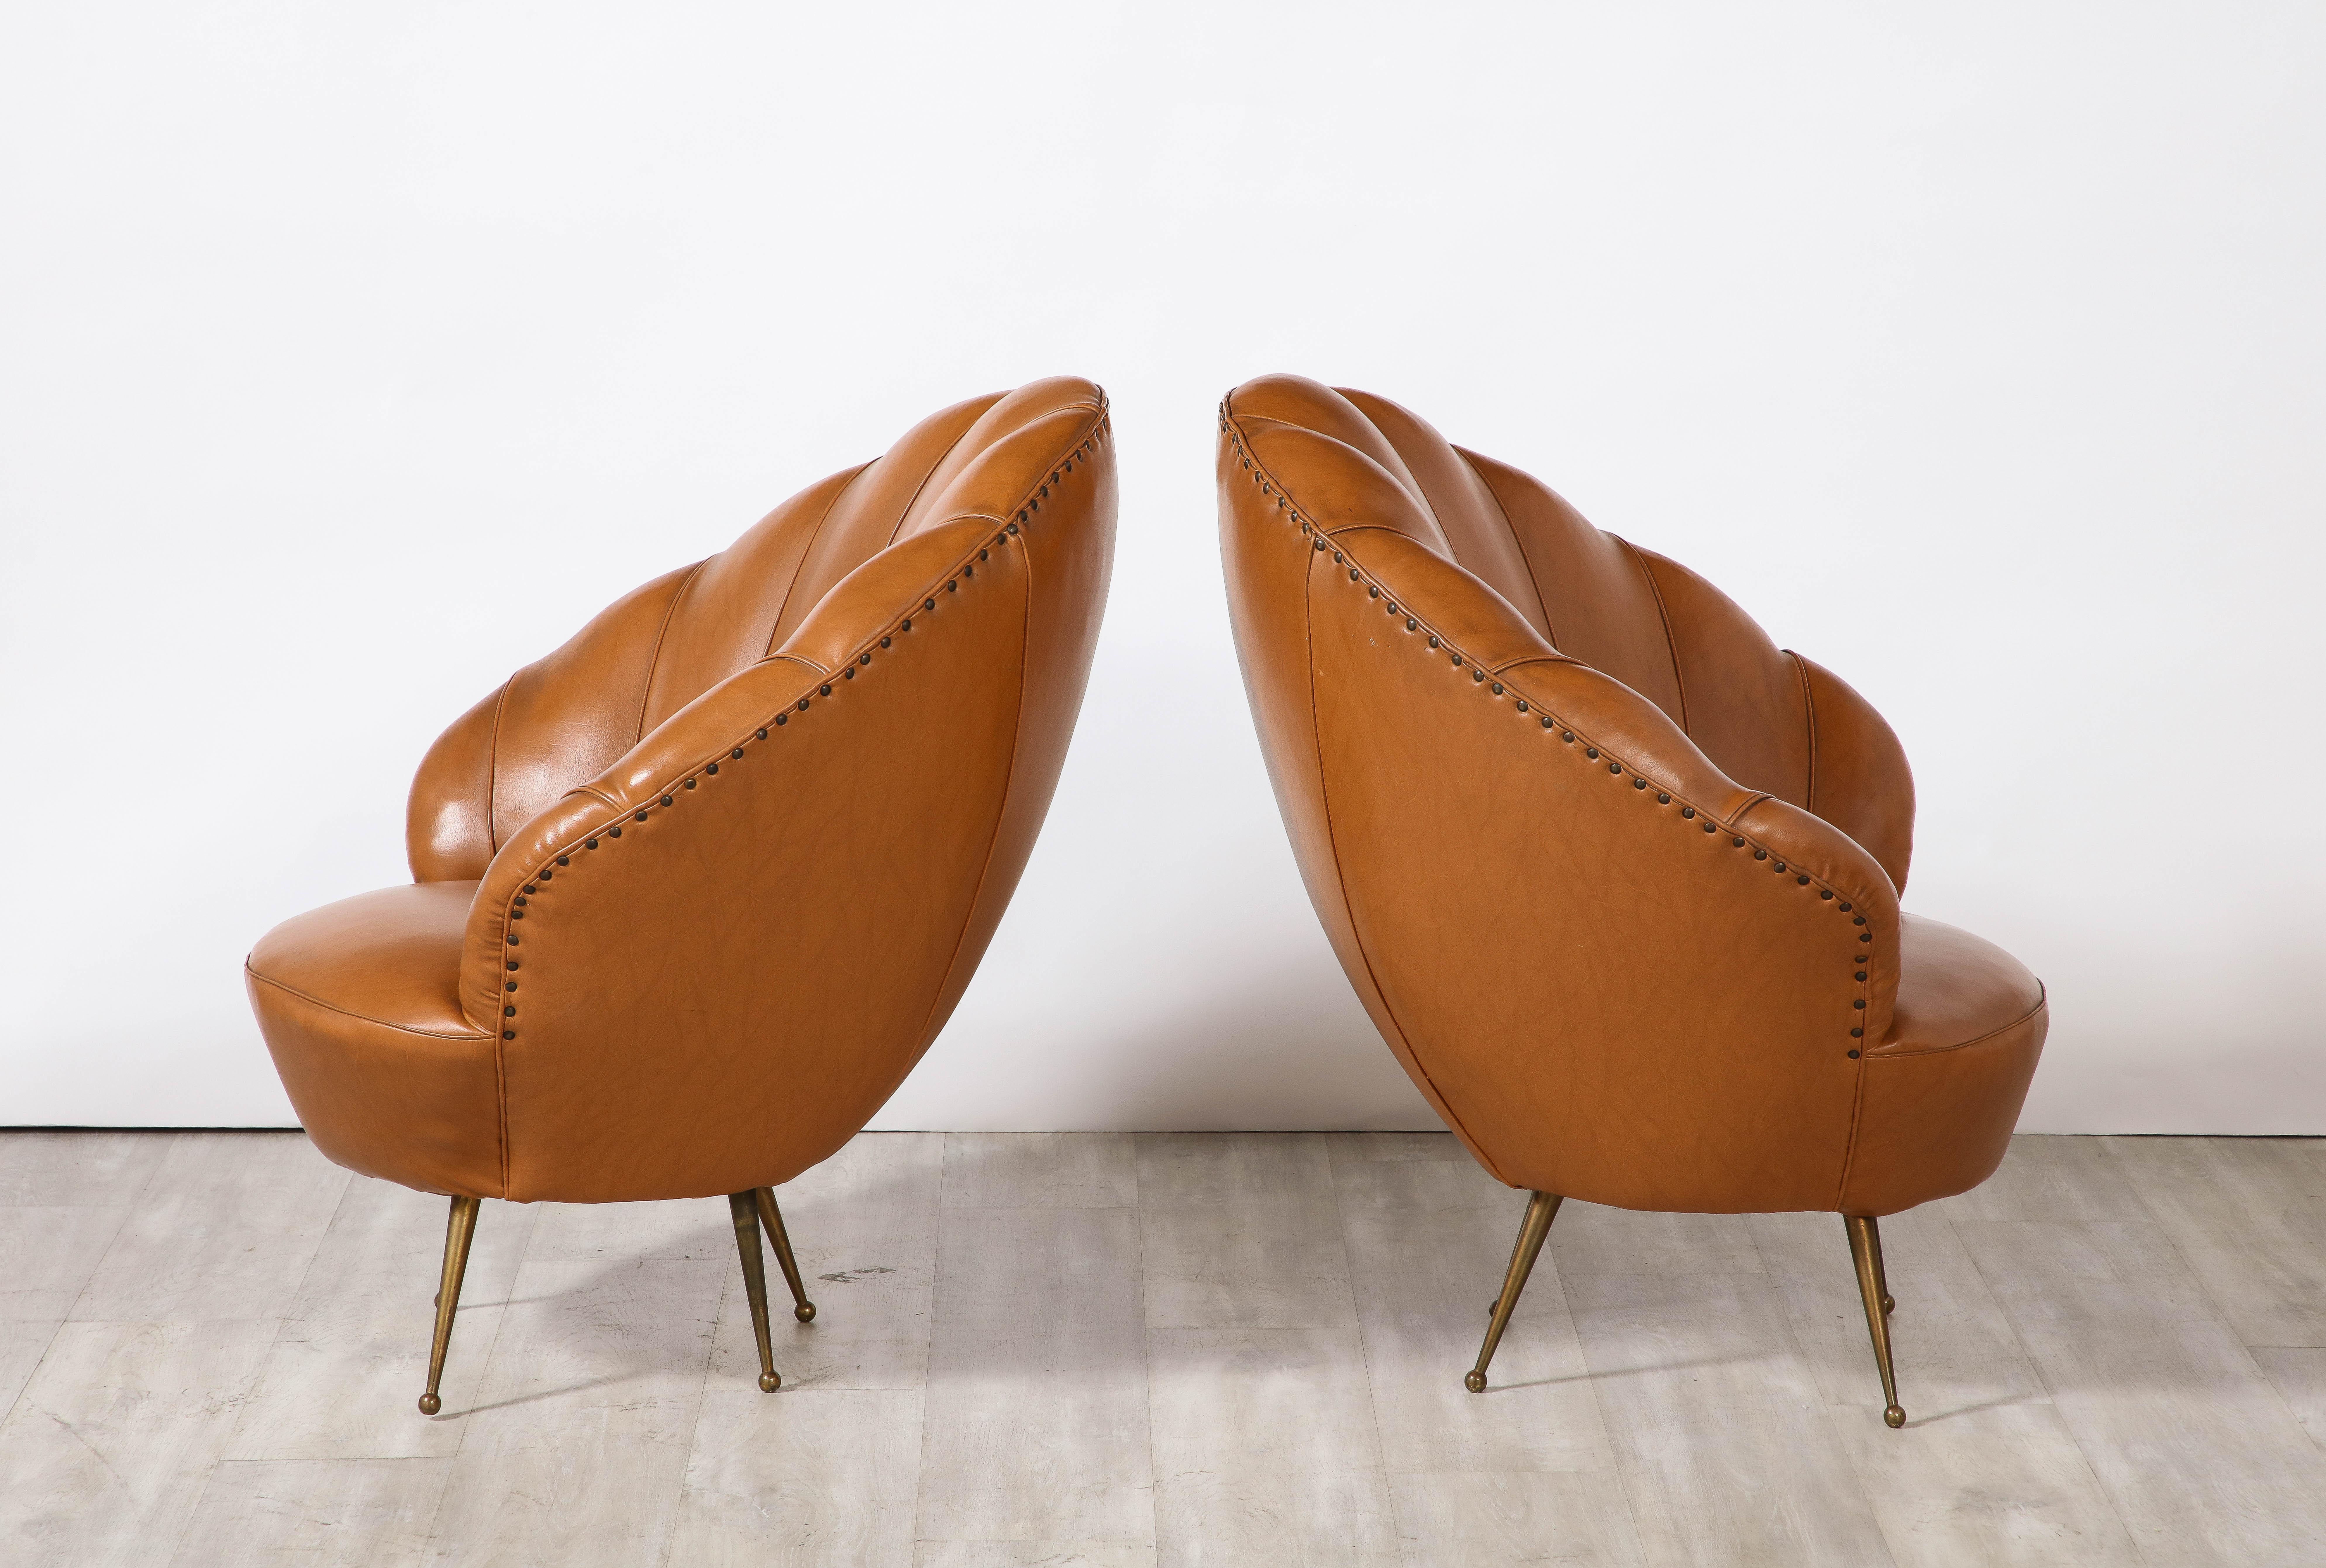 Pair of Italian Modernist Leather Scalloped Lounge Chairs, Circa 1950  For Sale 2